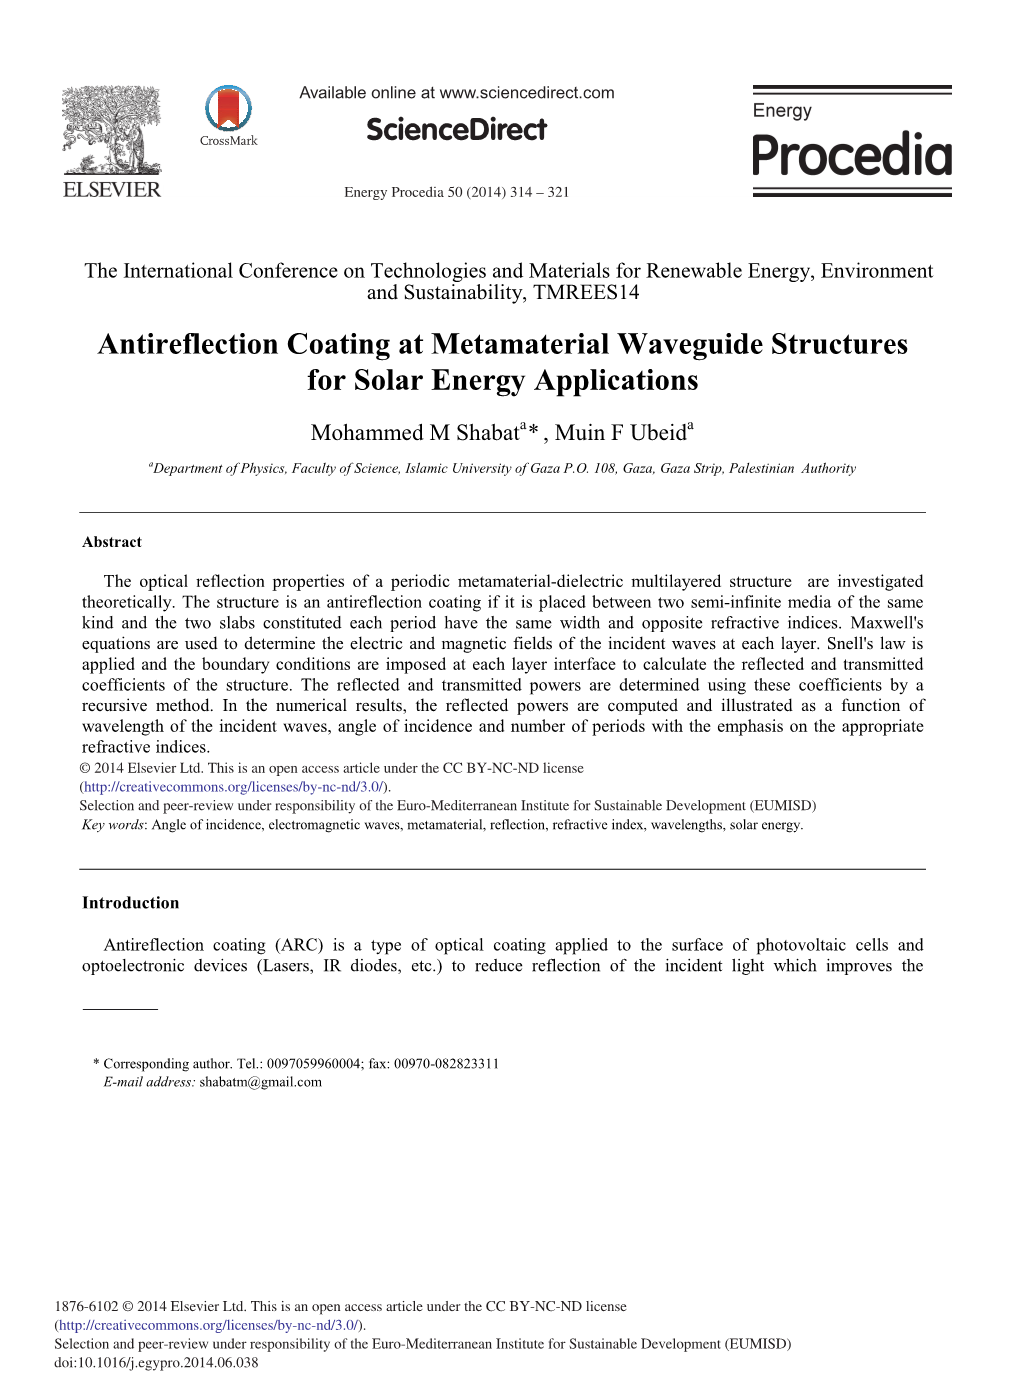 Antireflection Coating at Metamaterial Waveguide Structures for Solar Energy Applications